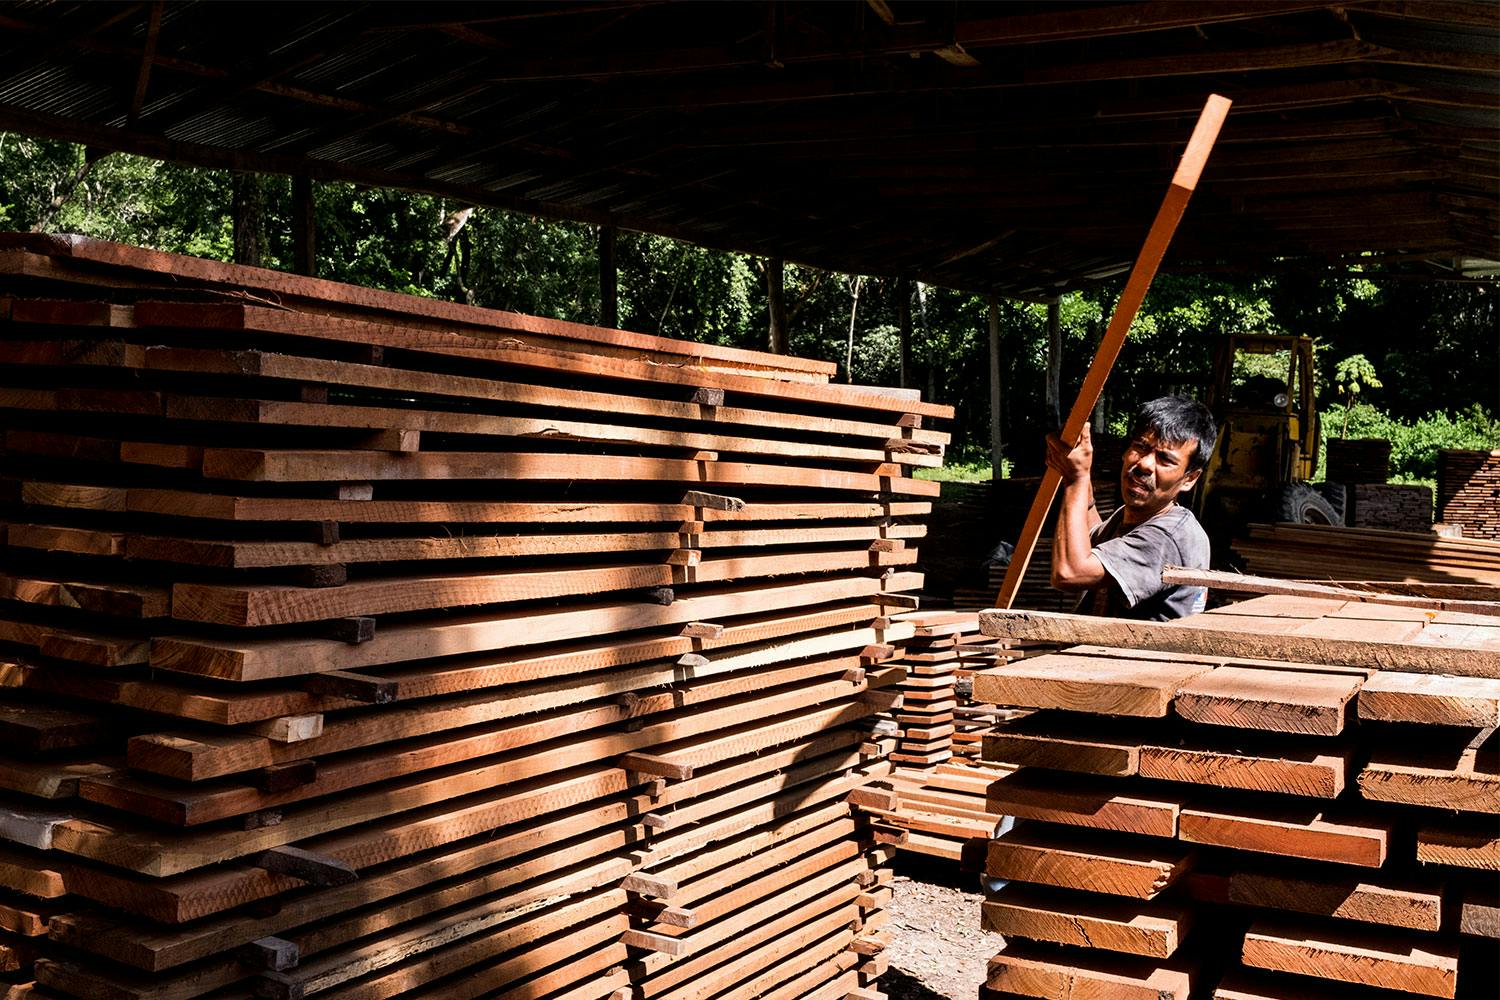 A worker adds a board to a stack of lumber under a canopy in a forest in Uaxactun, Guatemala.